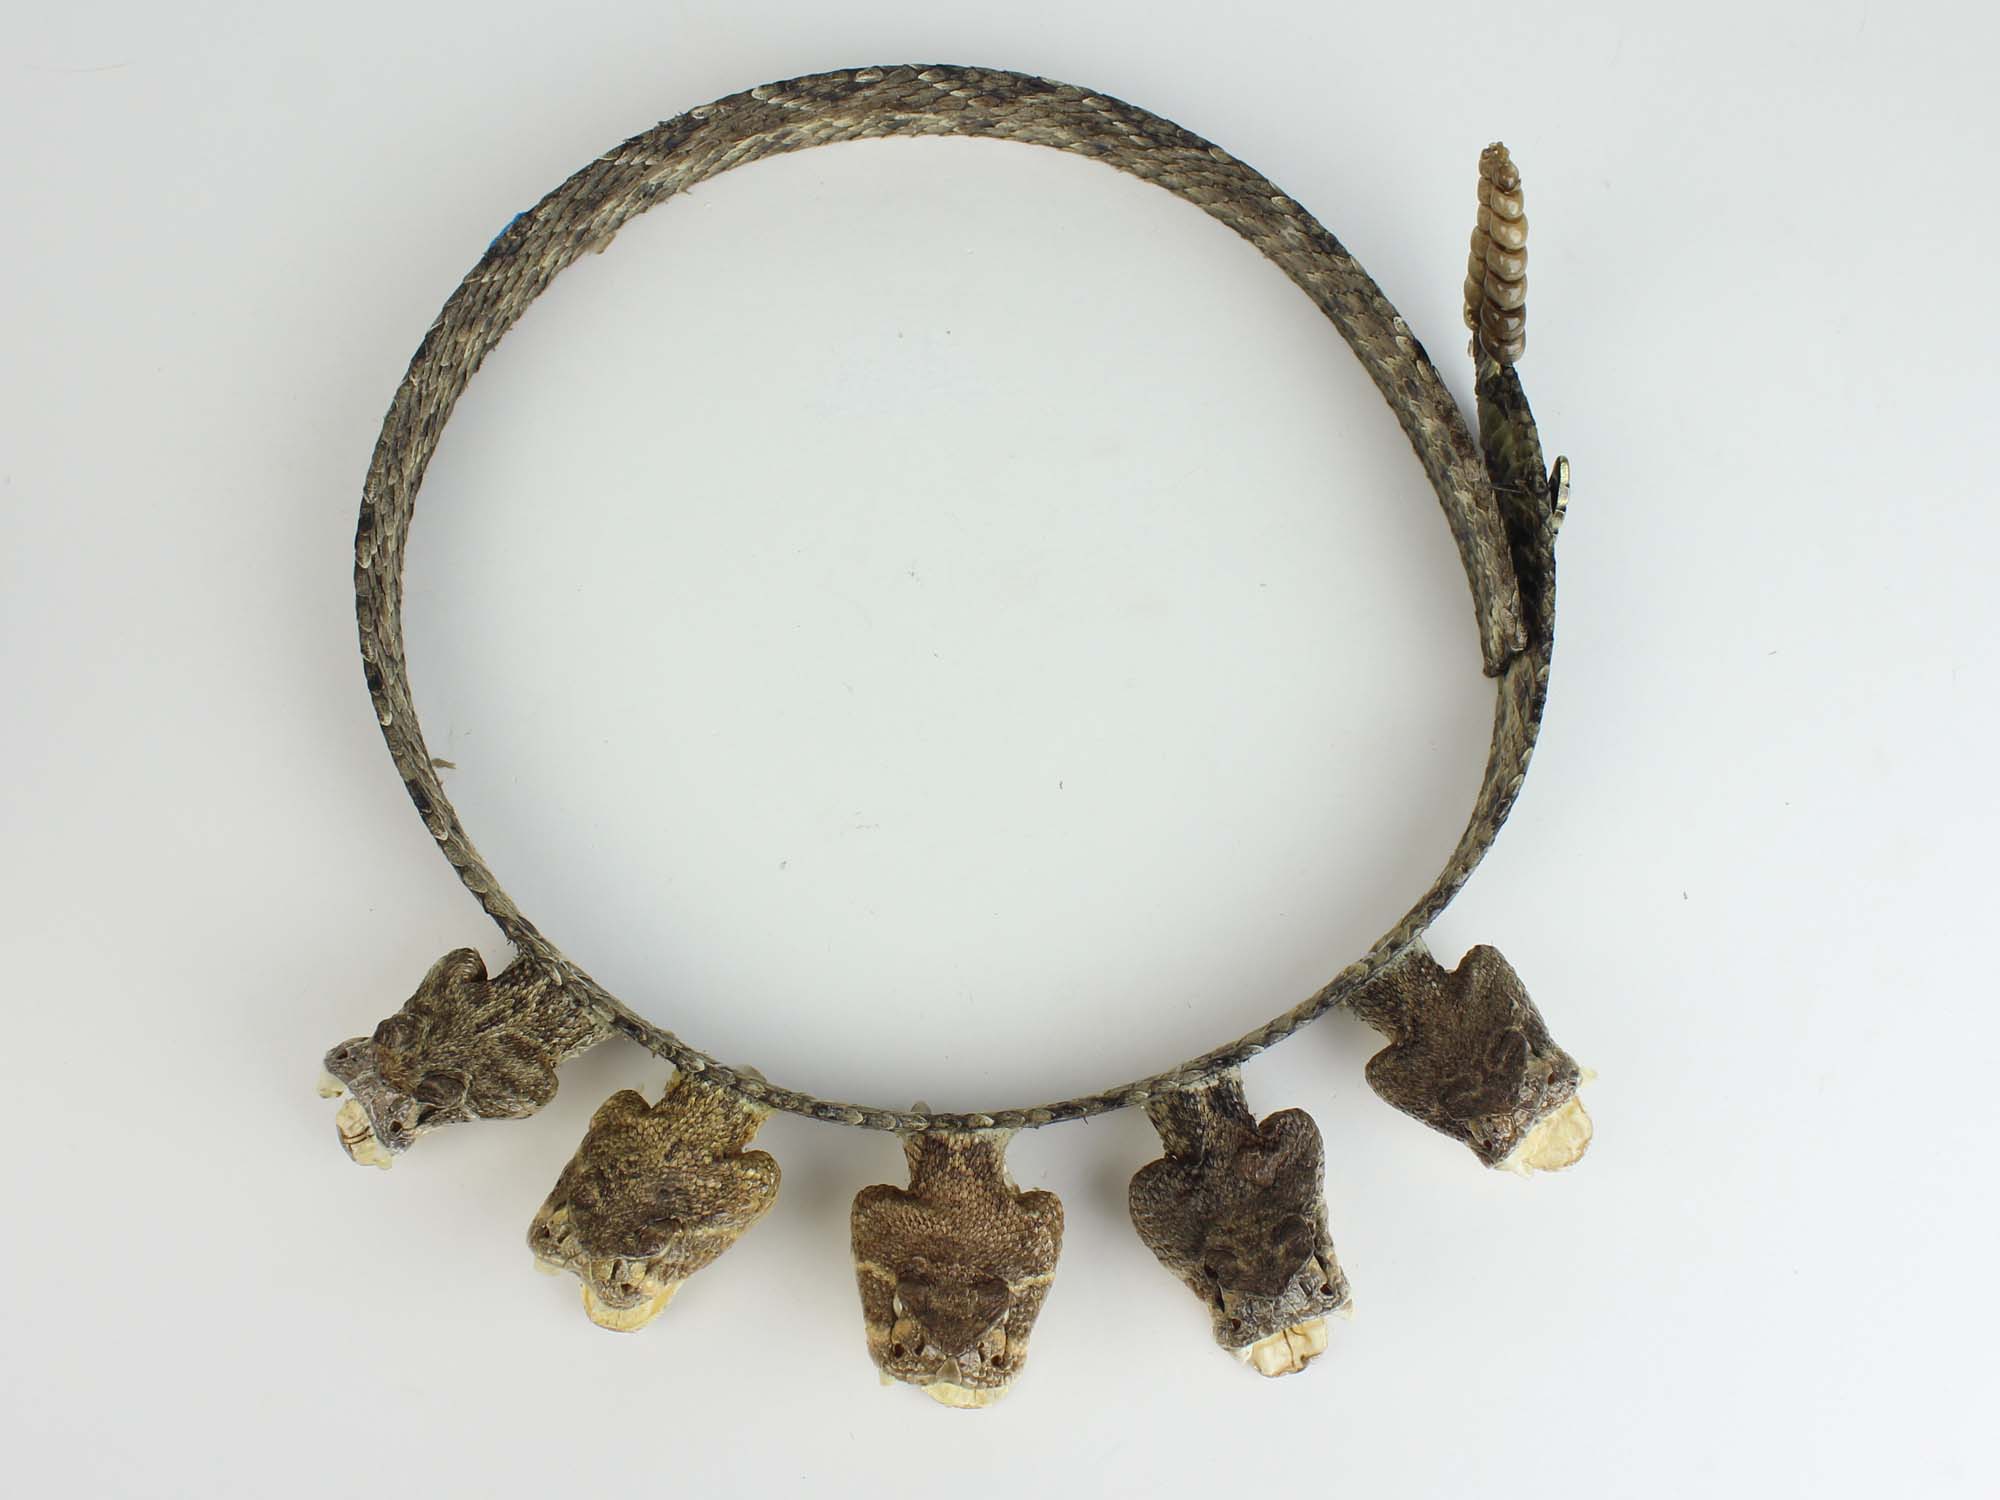 1" Real Rattlesnake Hat Band with Rattle and 5 Heads (Open Mouths) - 598-HB218 (K19)